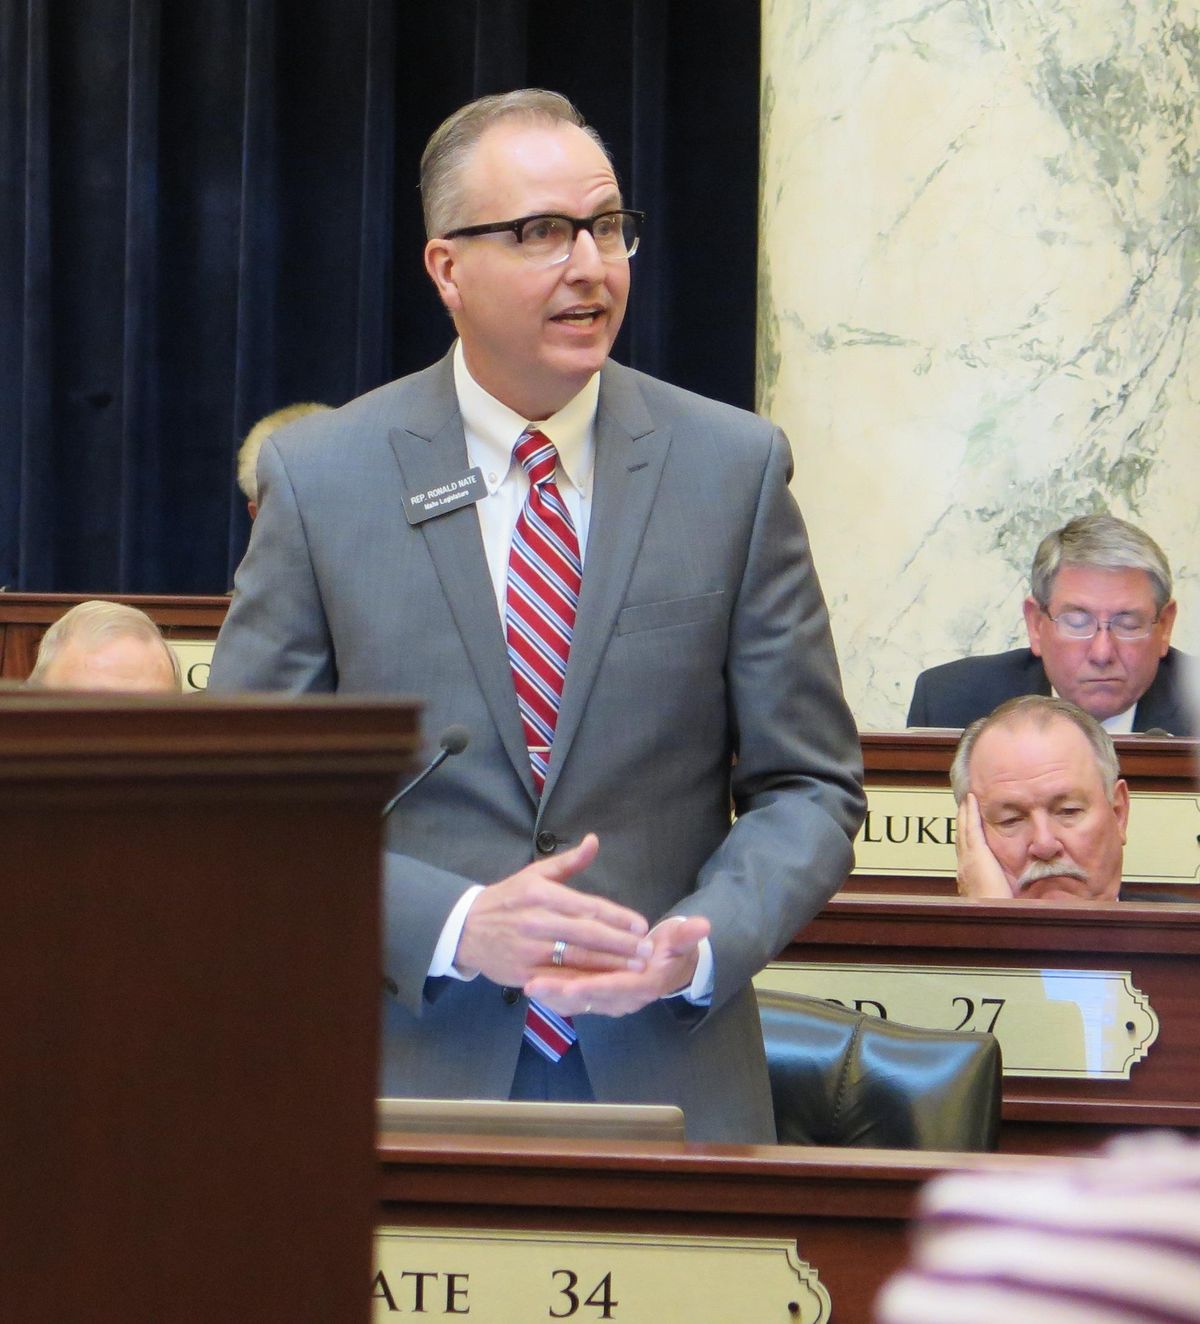 Idaho state Rep. Ron Nate, R-Rexburg, speaks on the floor of the House. Nate is leading a group of 30 lawmakers suing to overturn Gov. Butch Otter’s veto of legislation to repeal the state’s grocery tax. (Betsy Z. Russell / SR)